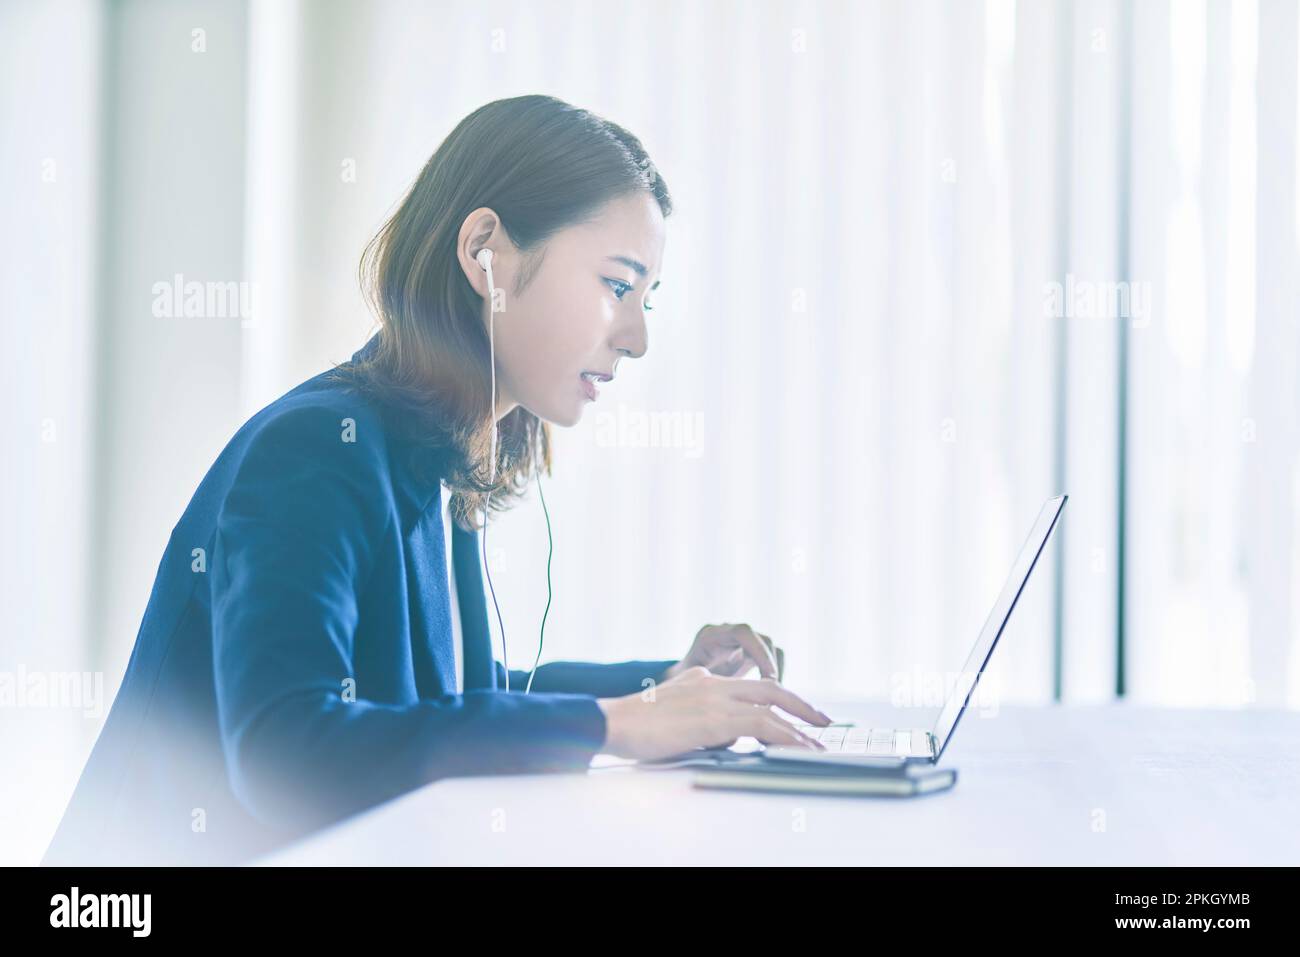 Woman making an online call Stock Photo